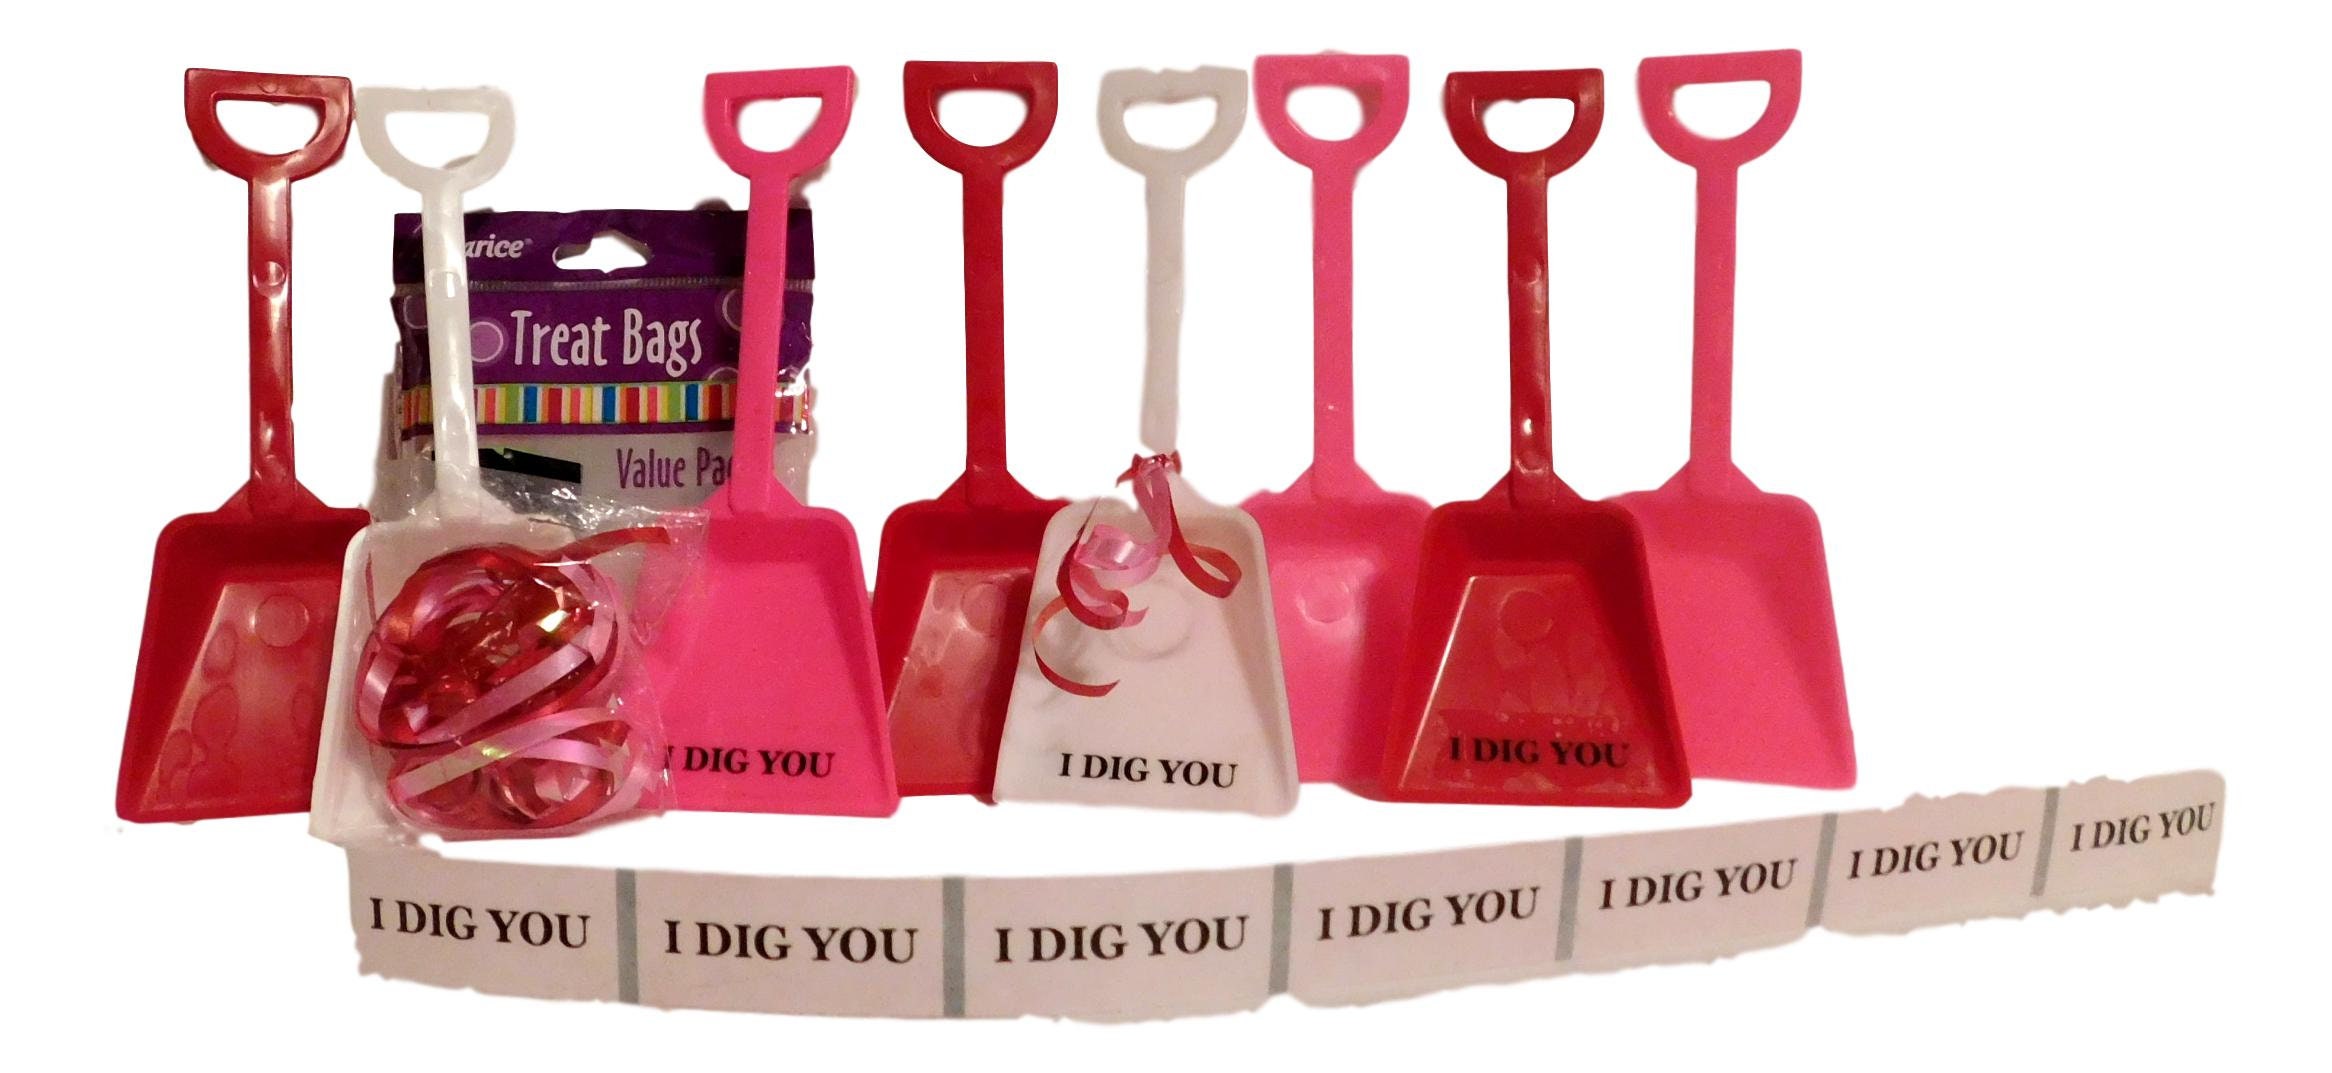 Mfg USA Lead Free* 48 "I Dig You" Stickers  48 Green Toy Plastic Sand Shovels 